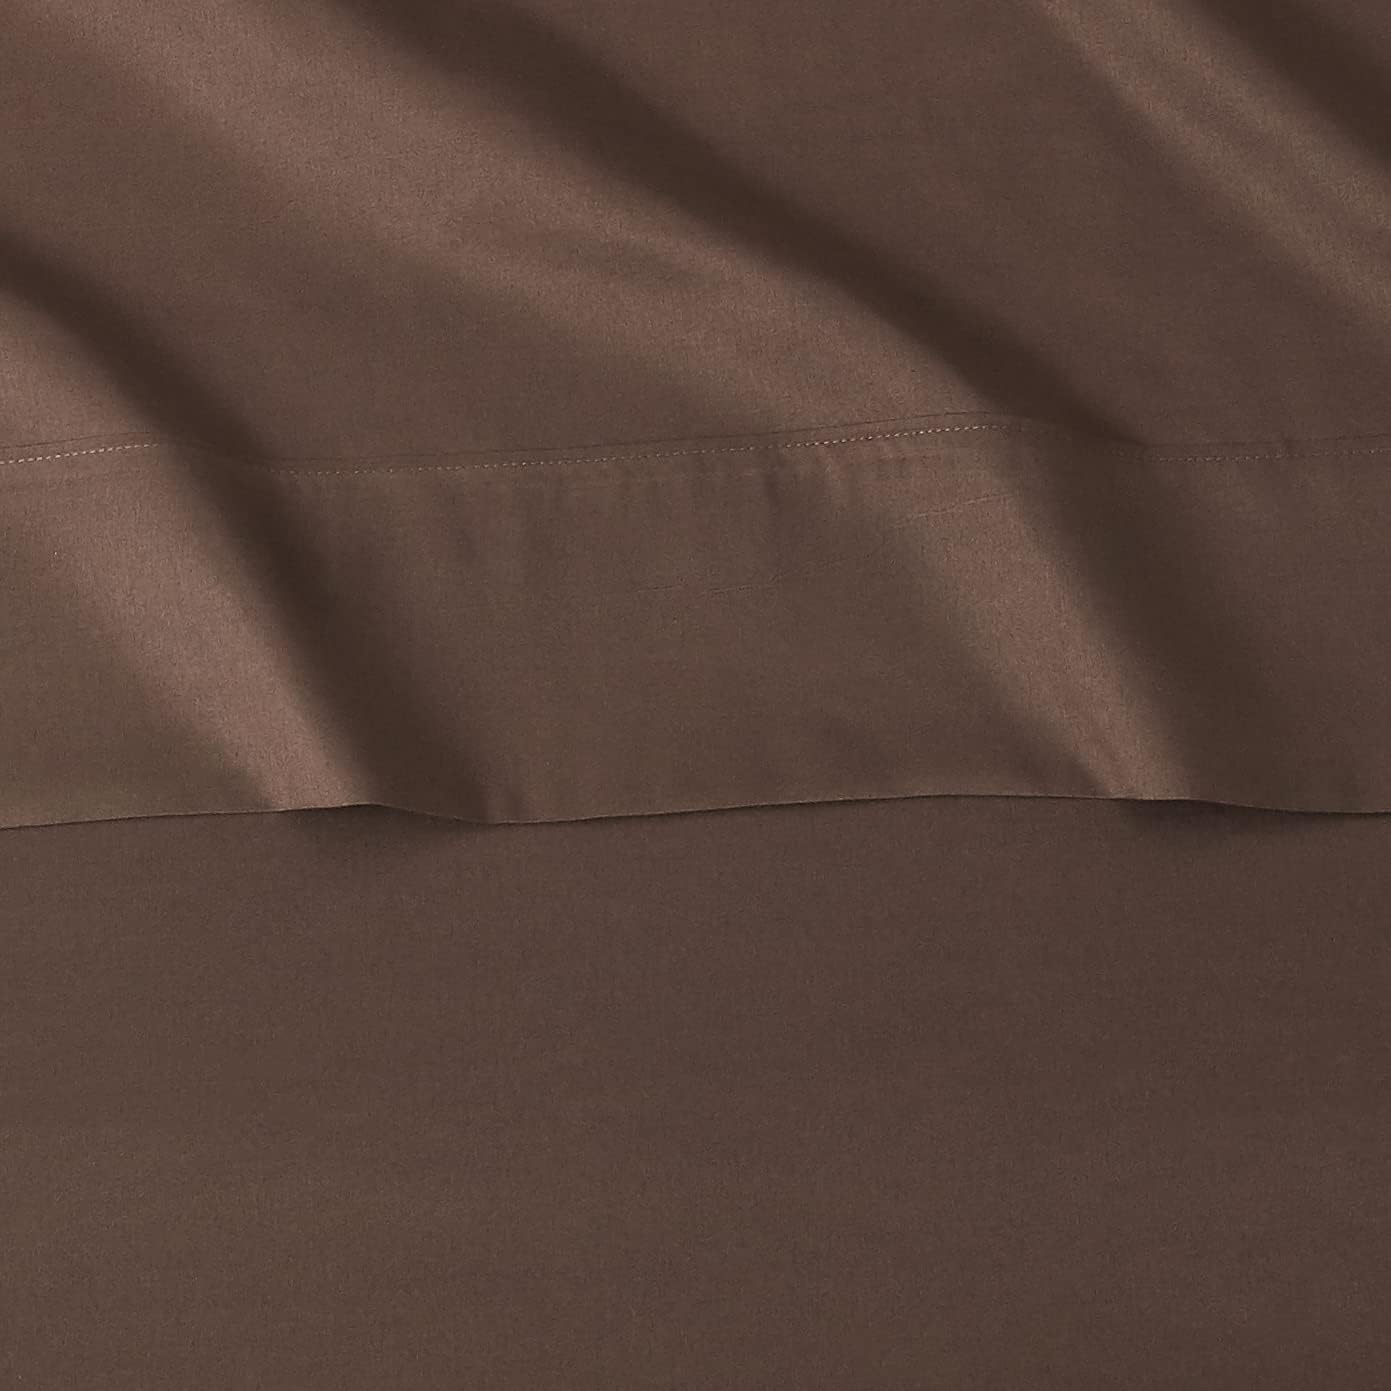 Amazon Basics Lightweight Super Soft Easy Care Microfiber 4-Piece Bed Sheet Set with 14-Inch Deep Pockets, Queen, Beige, Solid